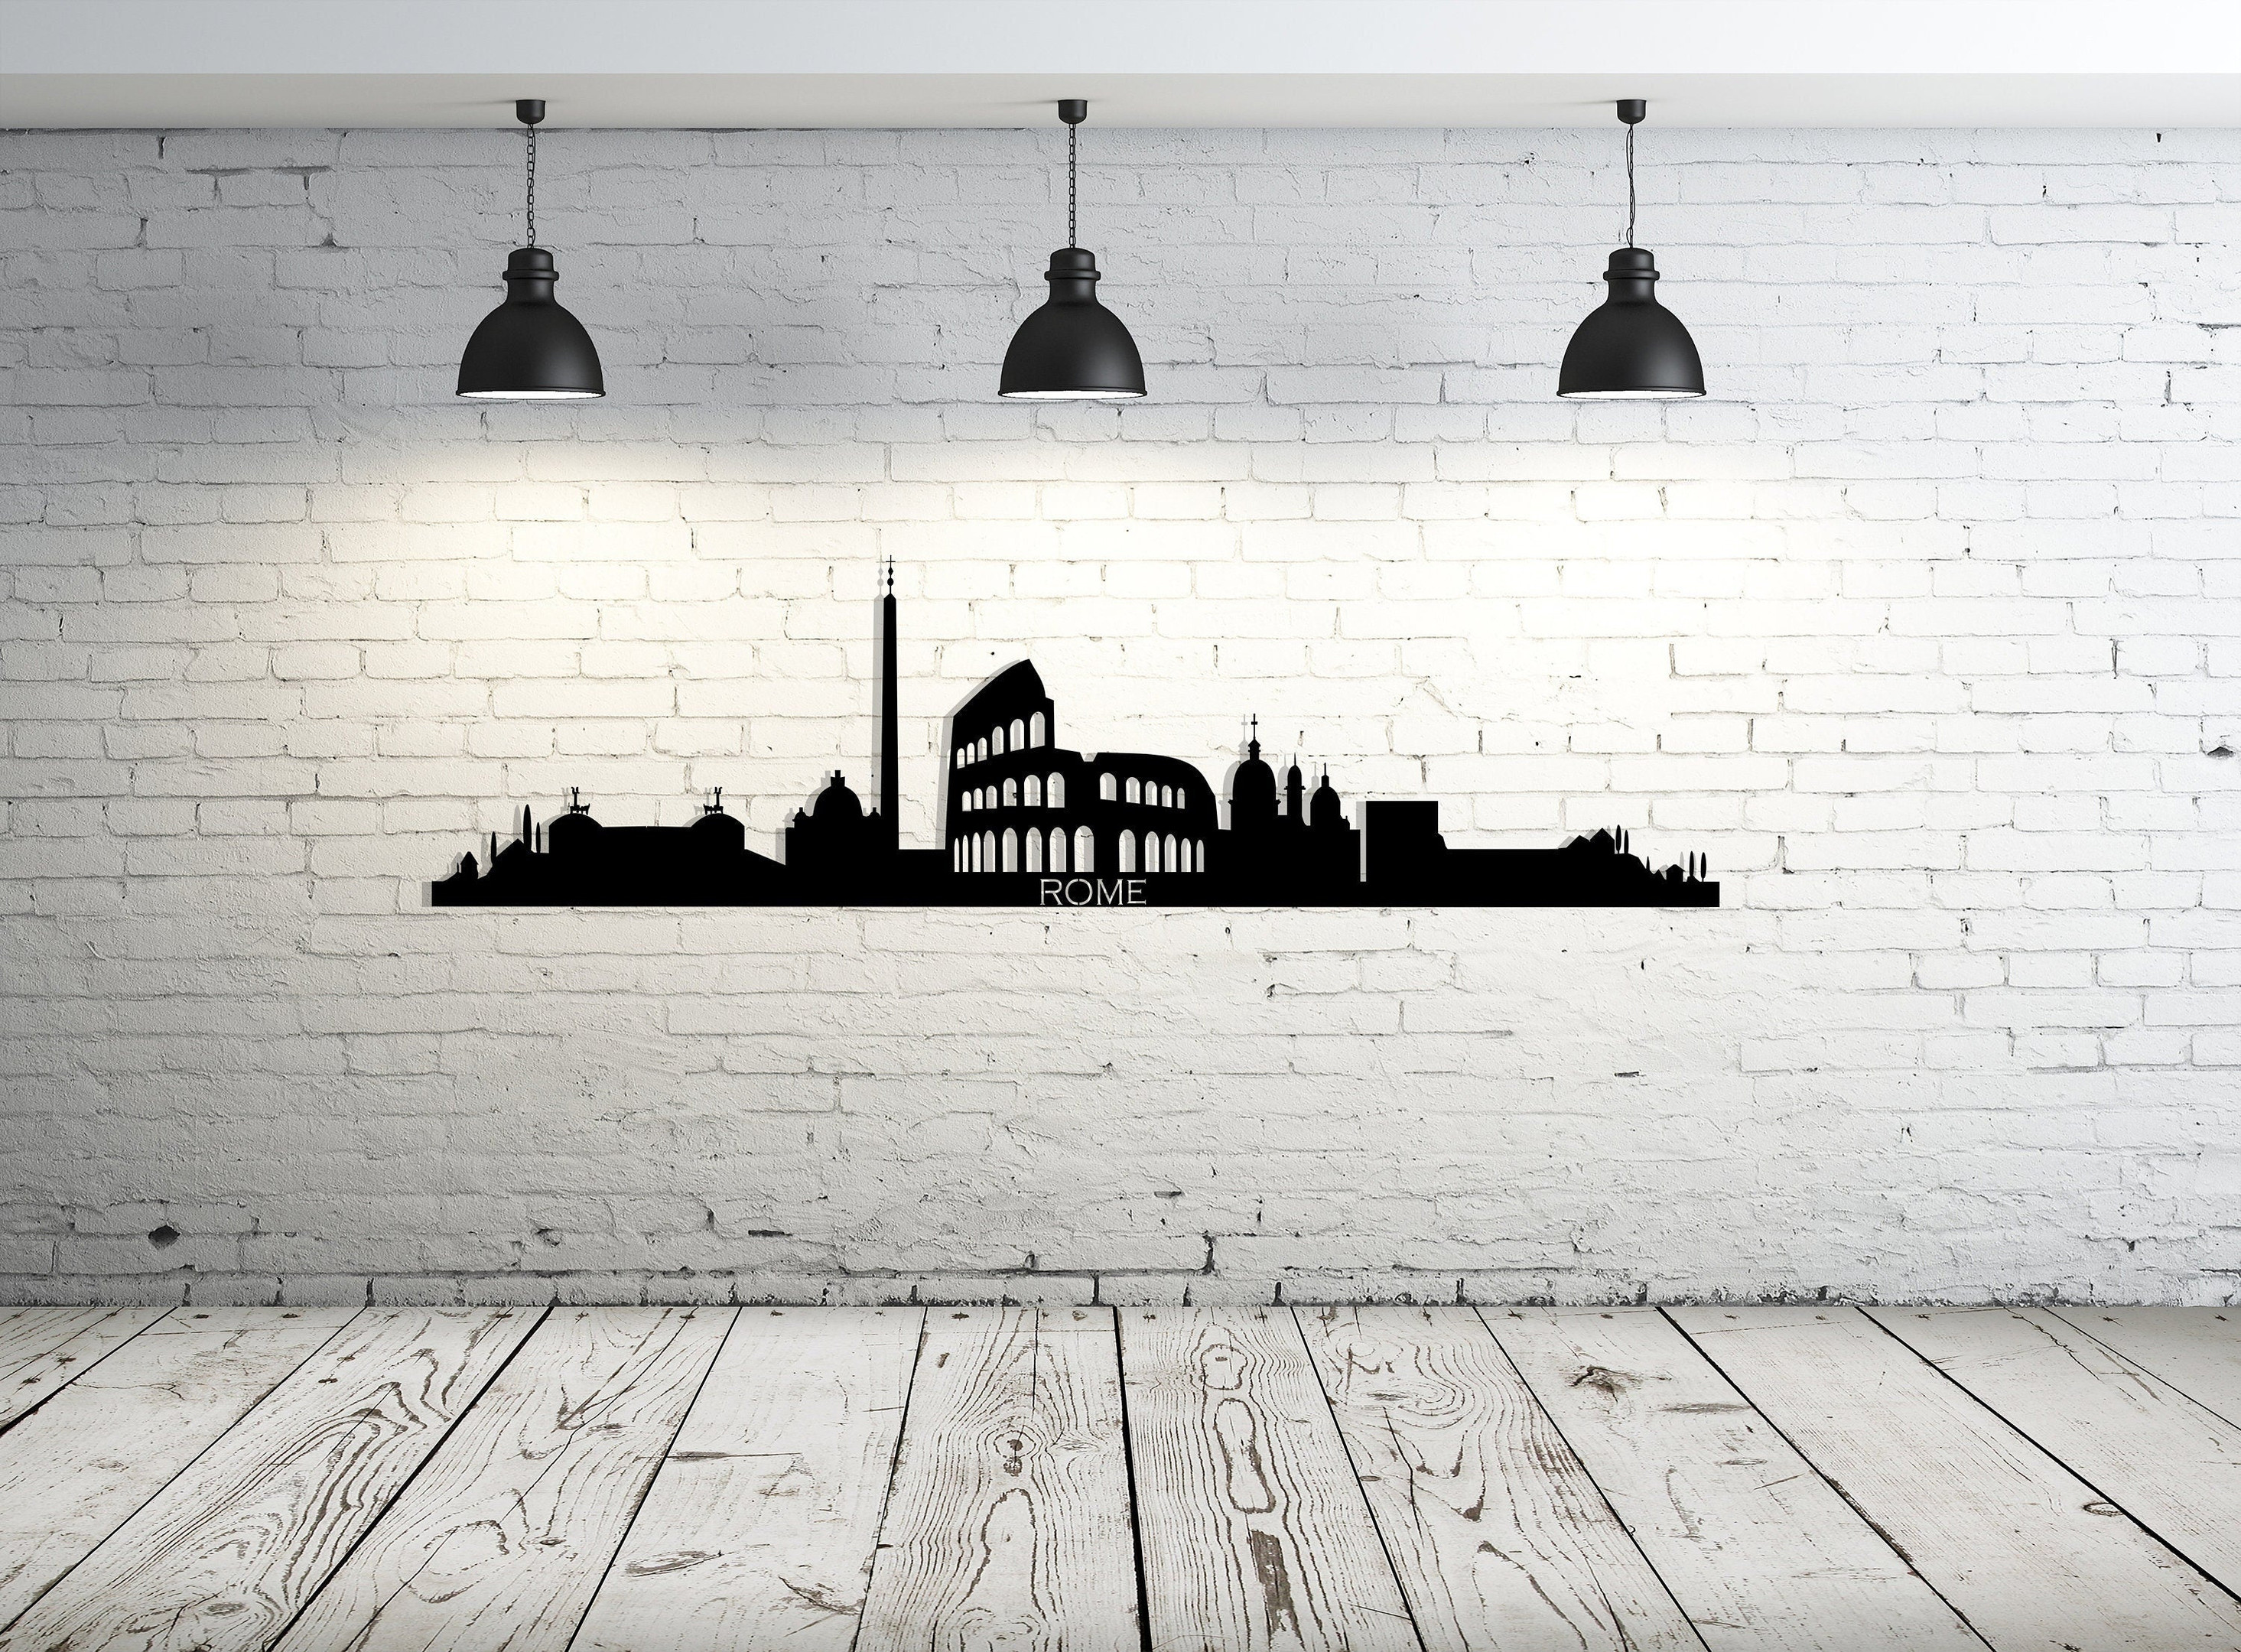 Rome City Silhouette Metal Wall Art, Rome Collosseum Metal Wall Decor, Housewarming Gift, Home Living Room Decoration, Wall Hangings,, Metal Laser Cut Metal Signs Custom Gift Ideas 12x12IN